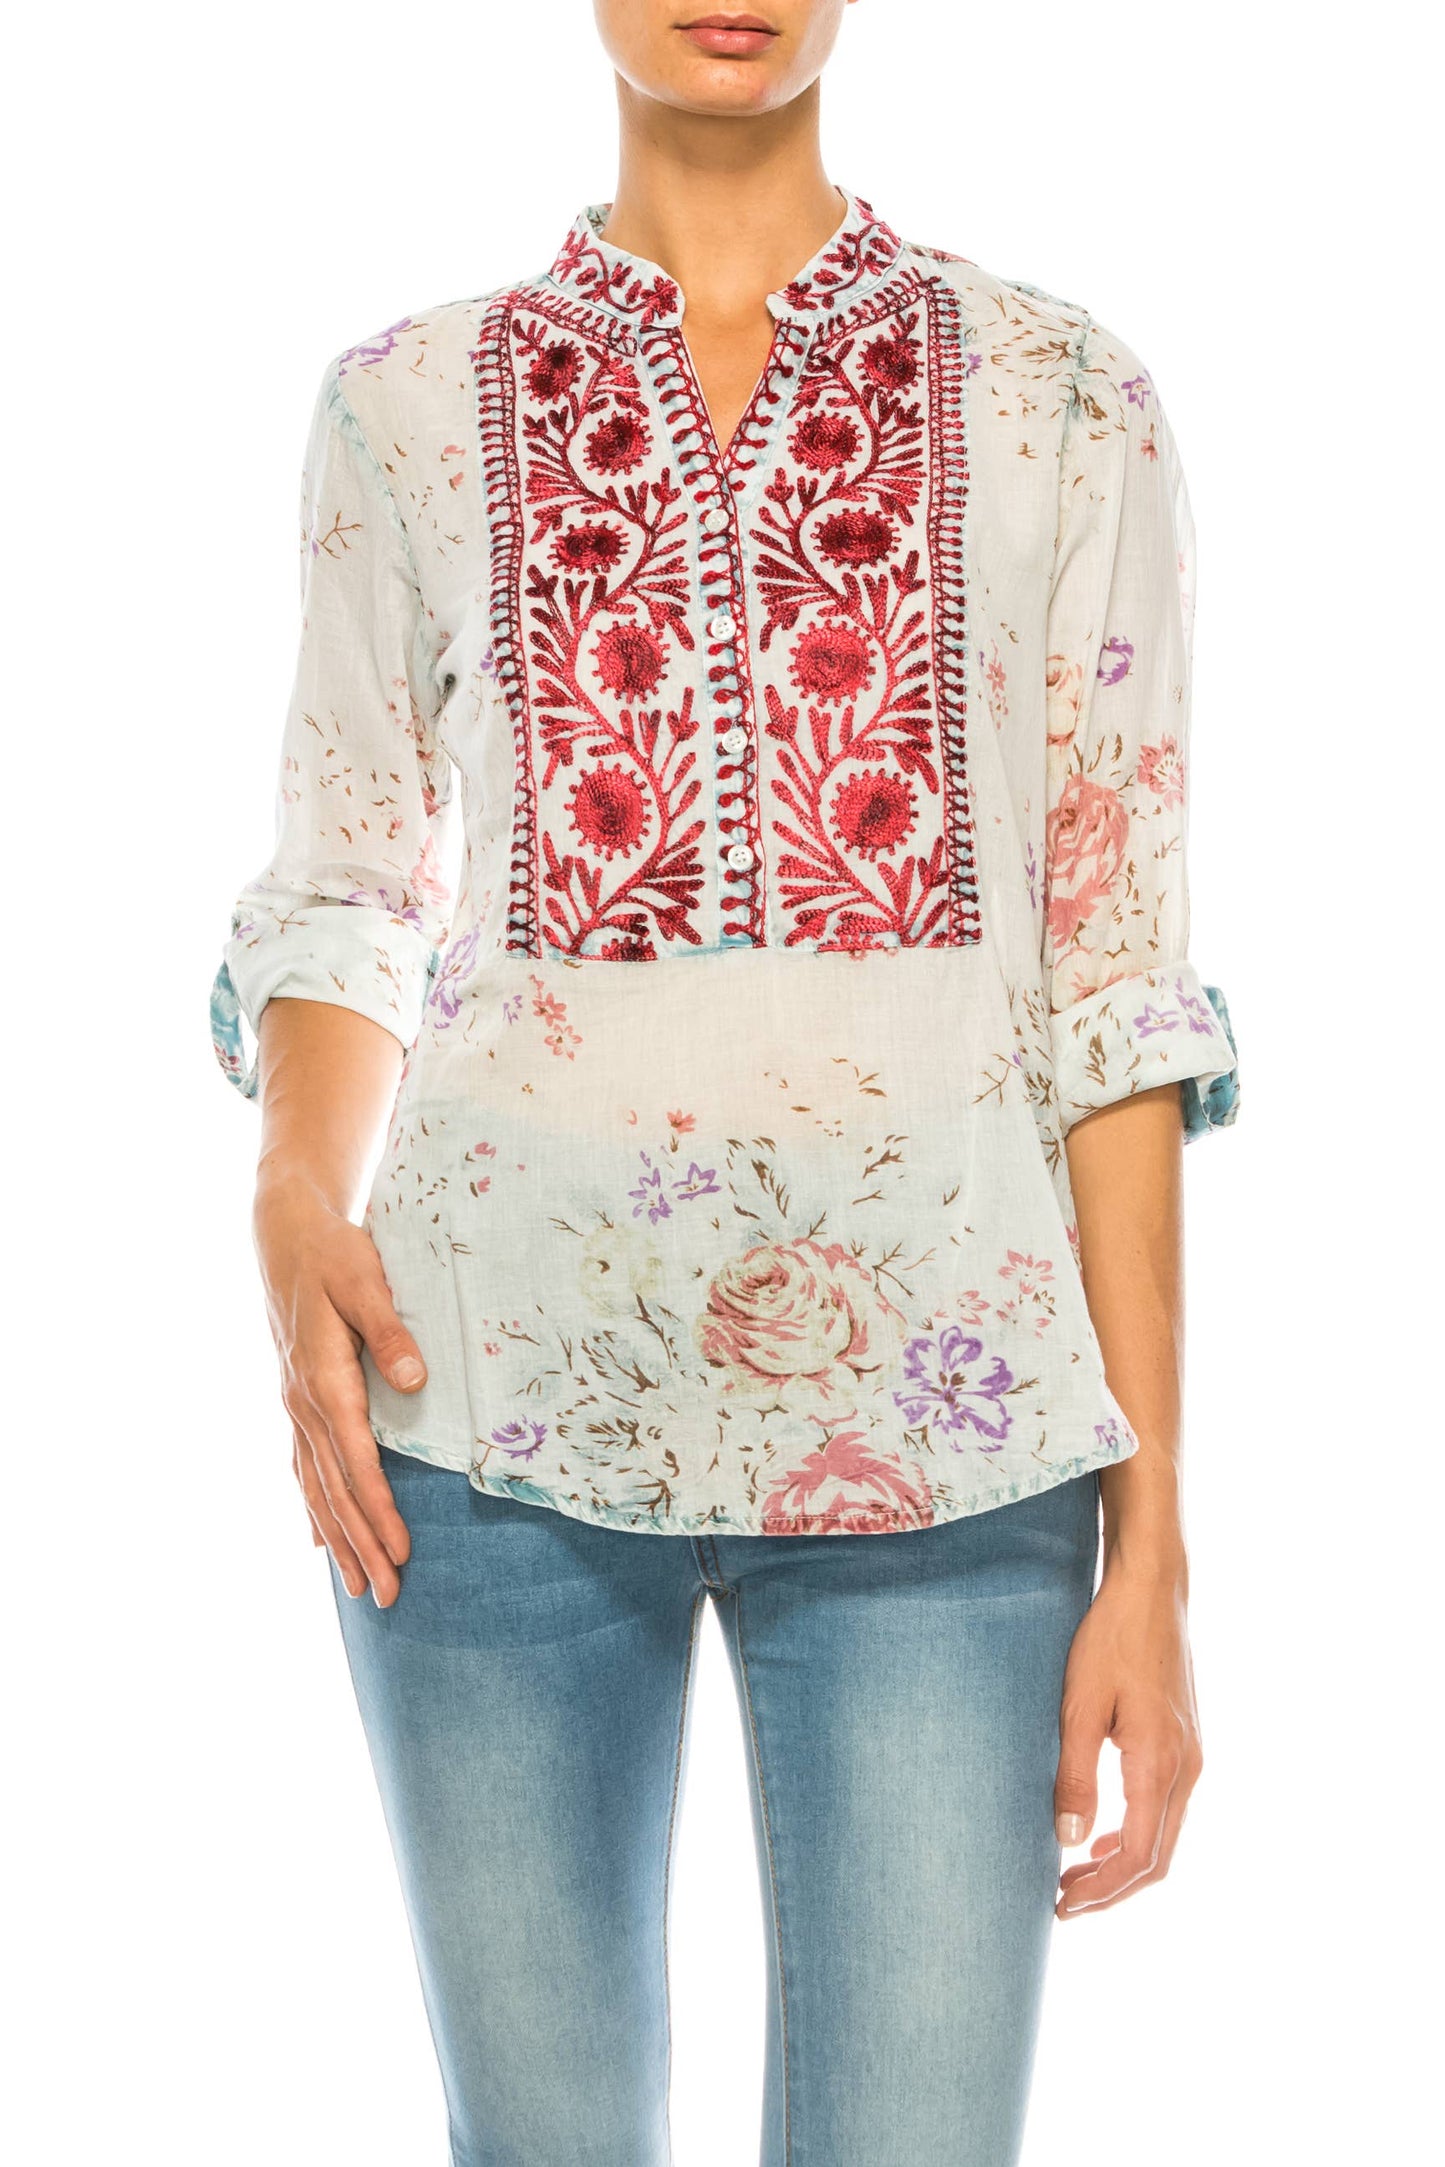 Vintage Tunic with Floral Embroidery